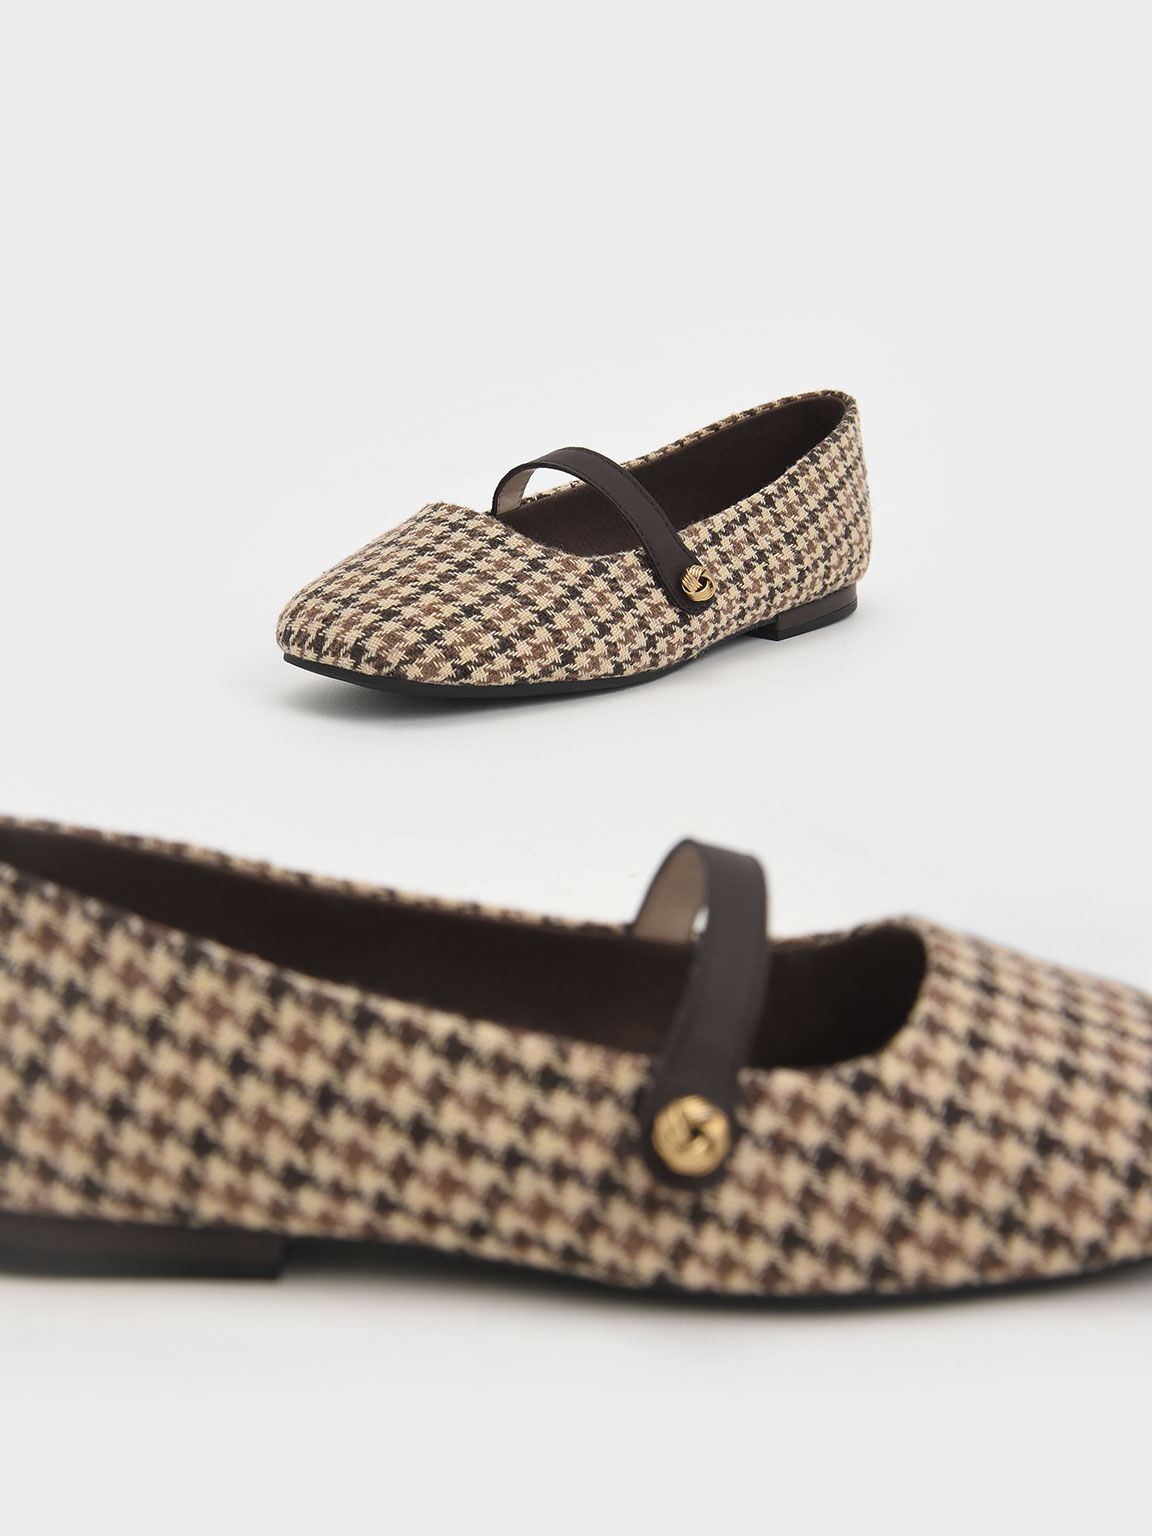 Girls' Houndstooth Print Mary Jane Flats, Multi, hi-res